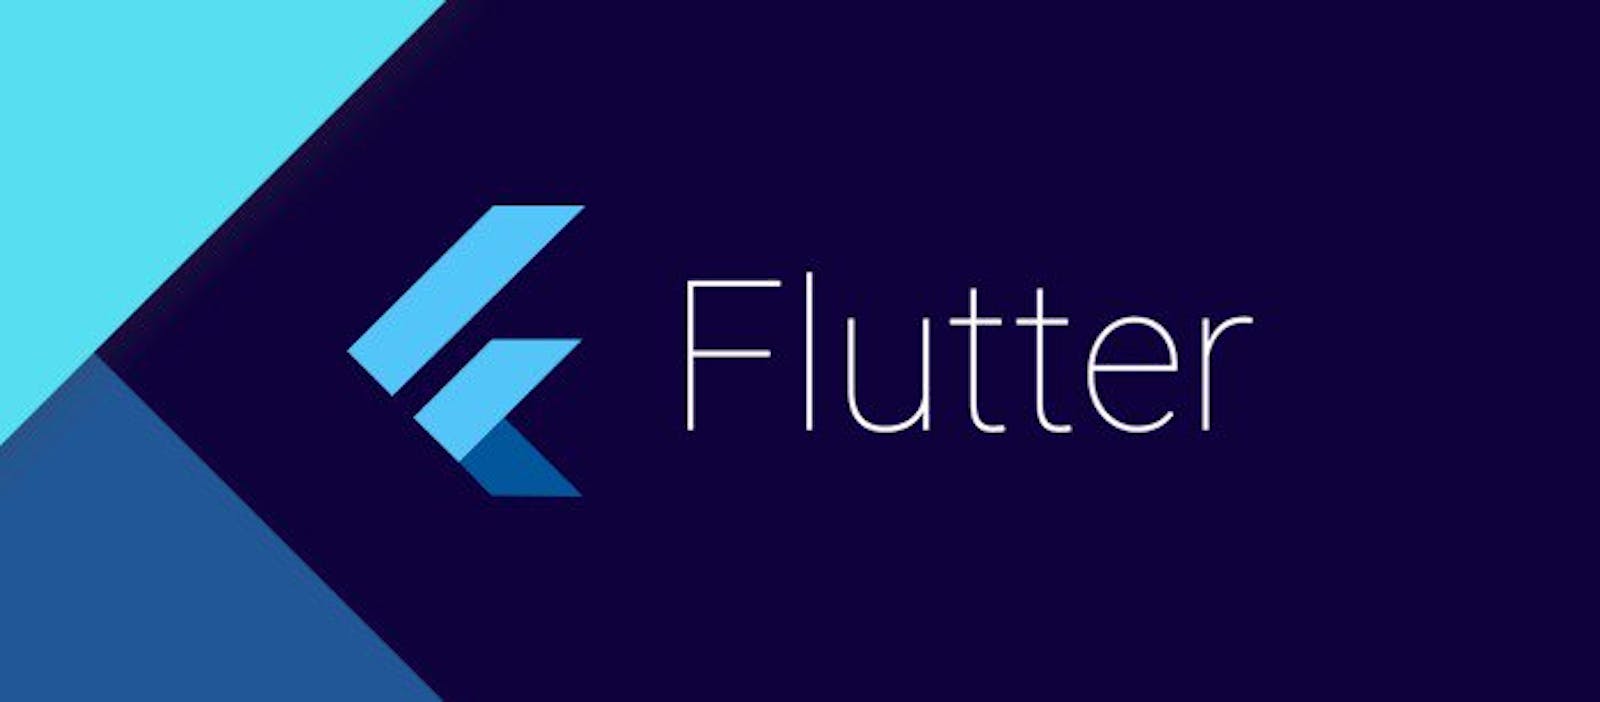 What is Flutter?